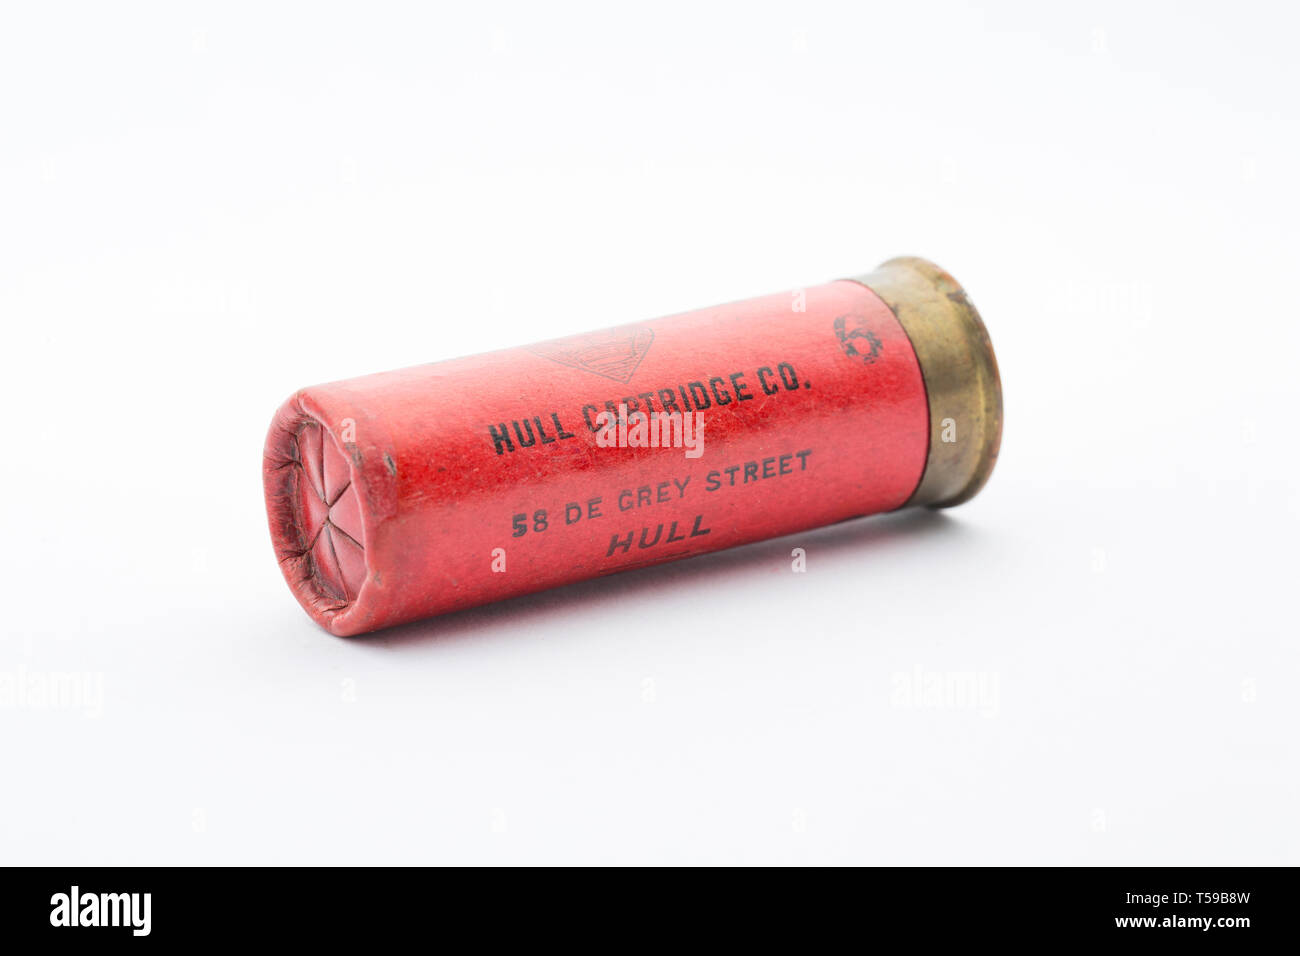 A Hull Cartridge Co. 12 gauge paper case shotgun cartridge with a crimped closure loaded wit No 6 lead shot pellets. Collecting shotgun cartridges is  Stock Photo